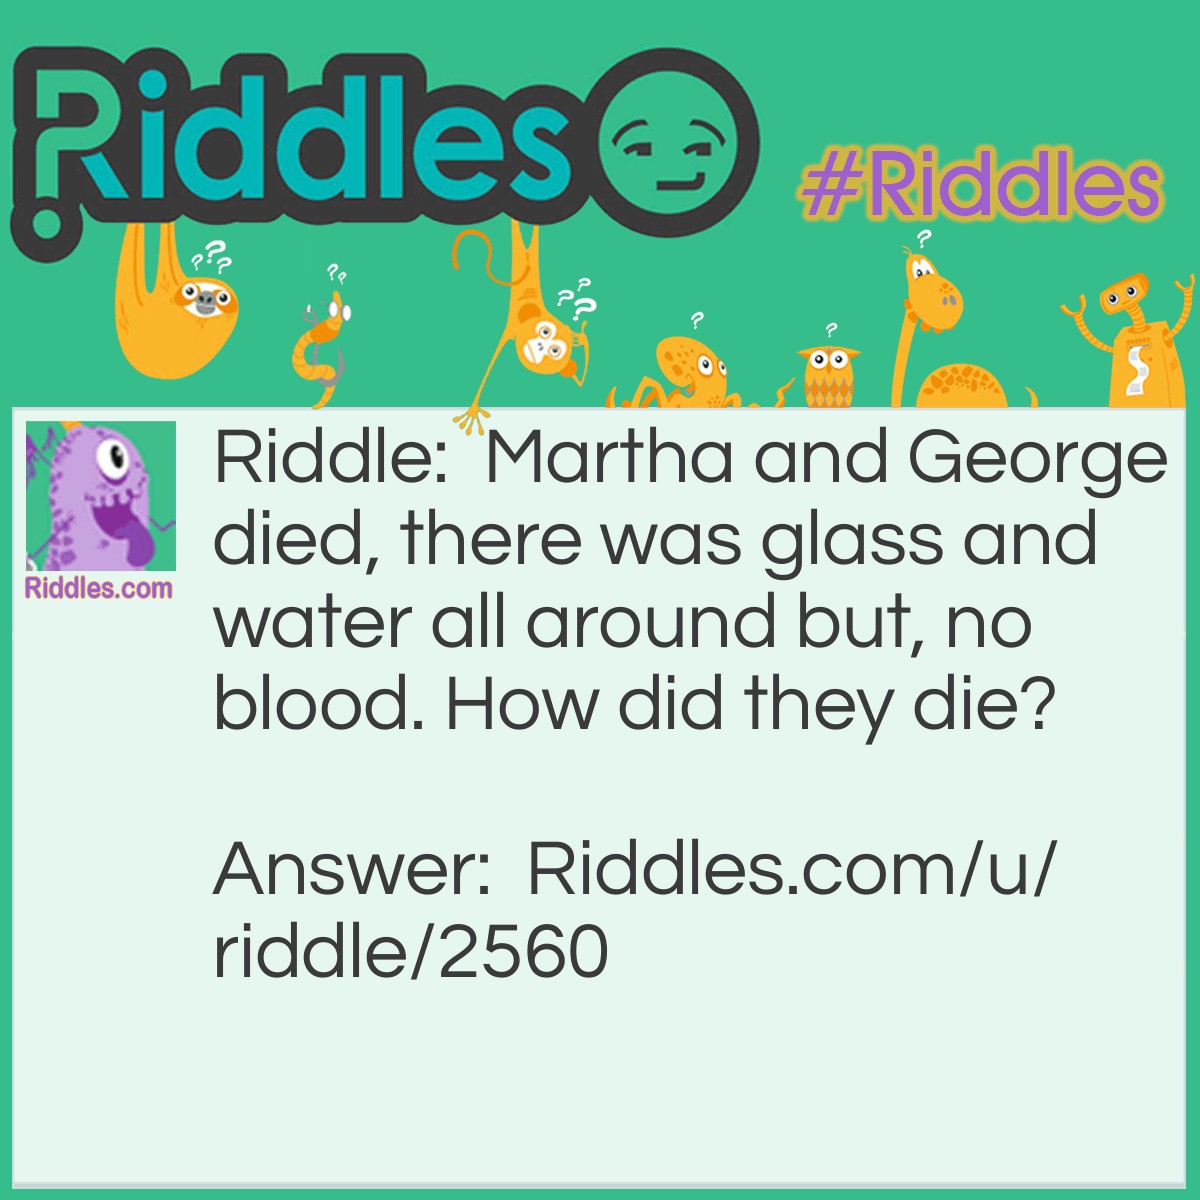 Riddle: Martha and George died, there was glass and water all around but, no blood. How did they die? Answer: They were fish.